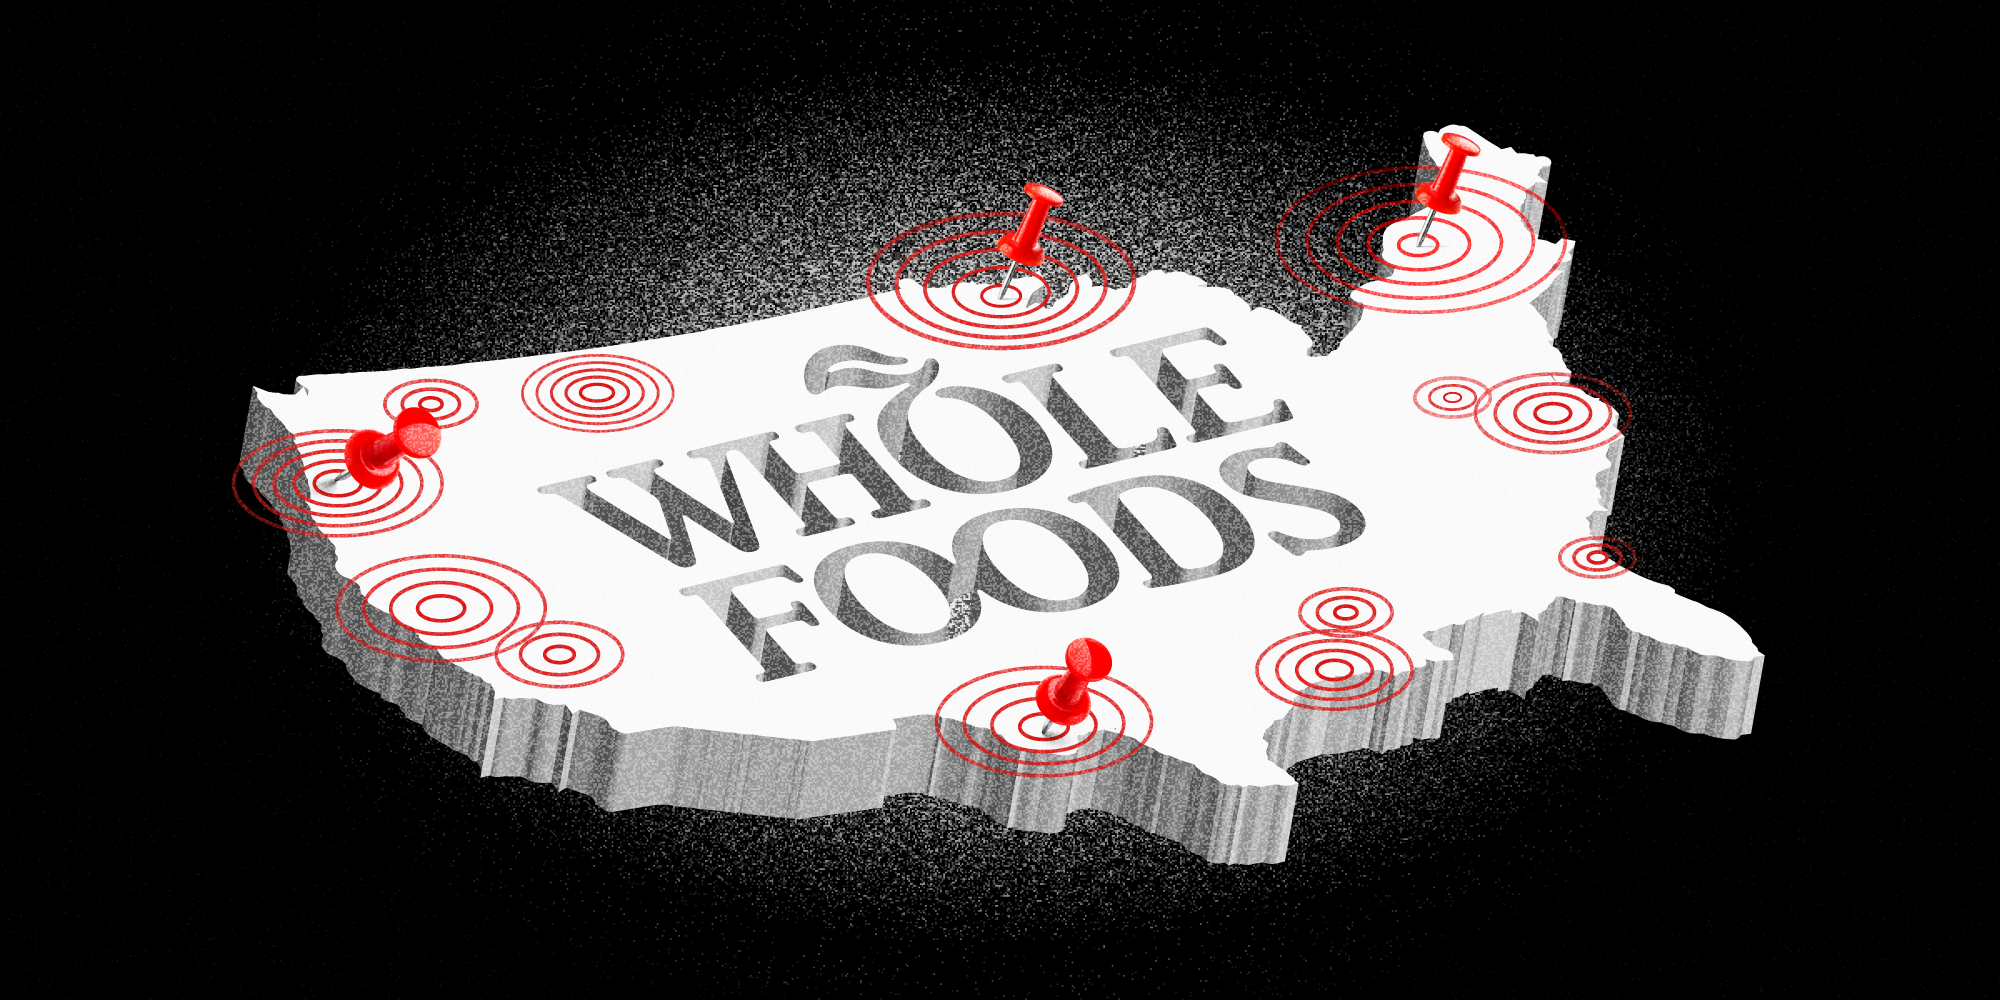 Amazon-owned Whole Foods is quietly tracking its employees with a heat map tool that ranks which stores are most at risk of unionizing